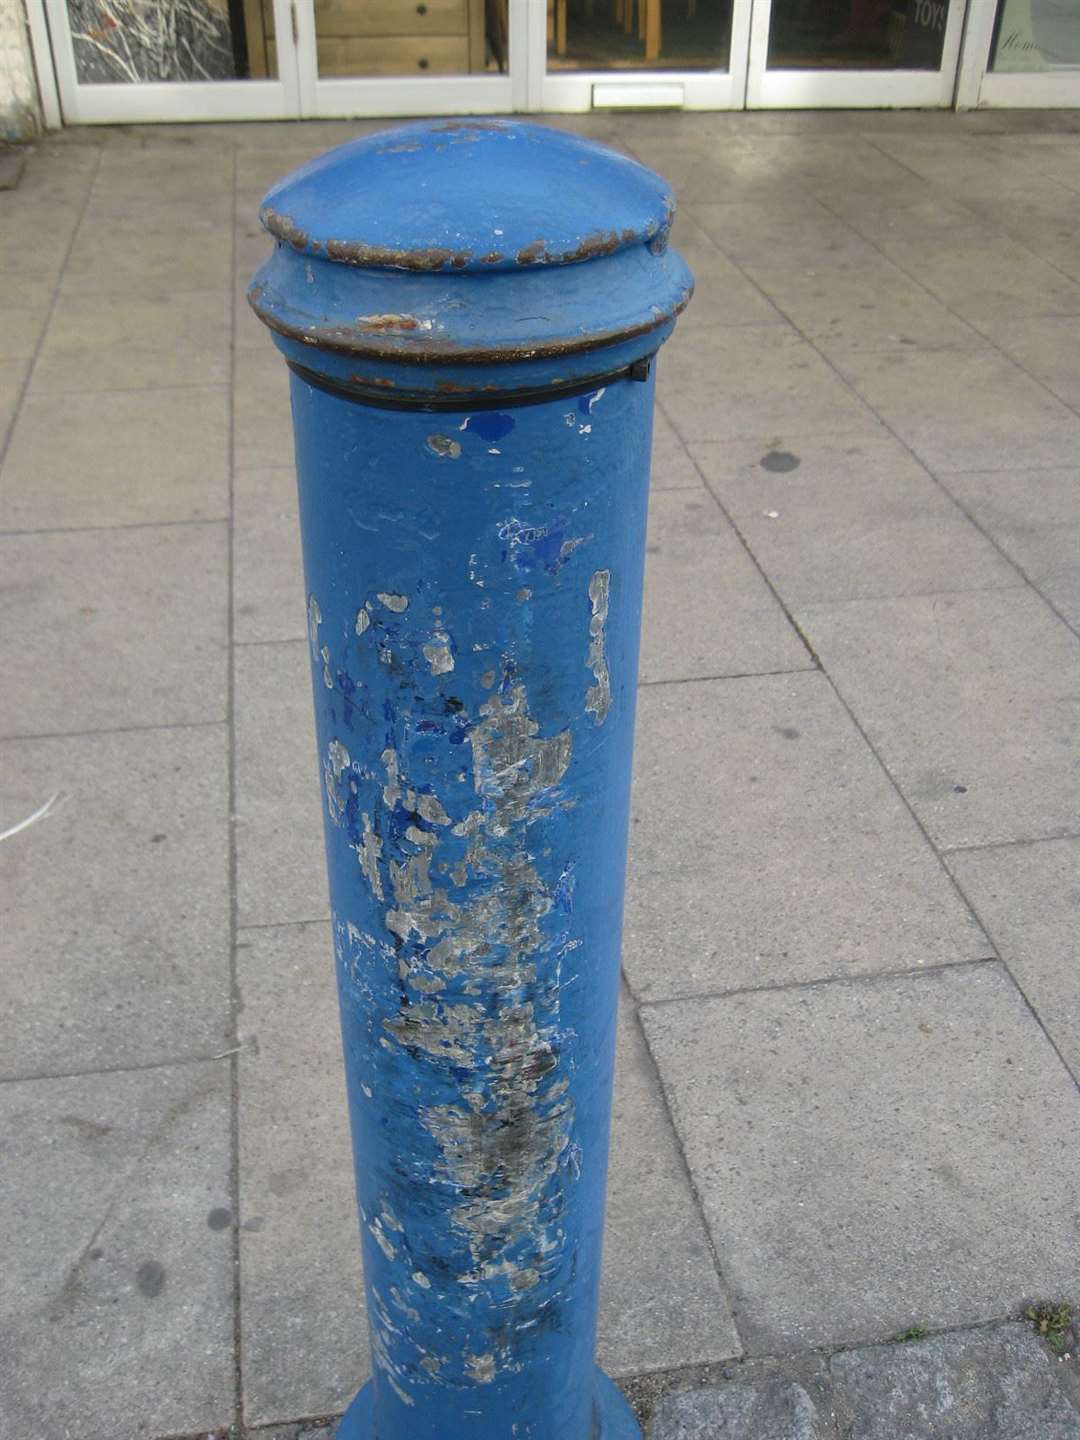 Long overdue: bollards in Sheerness need repainting